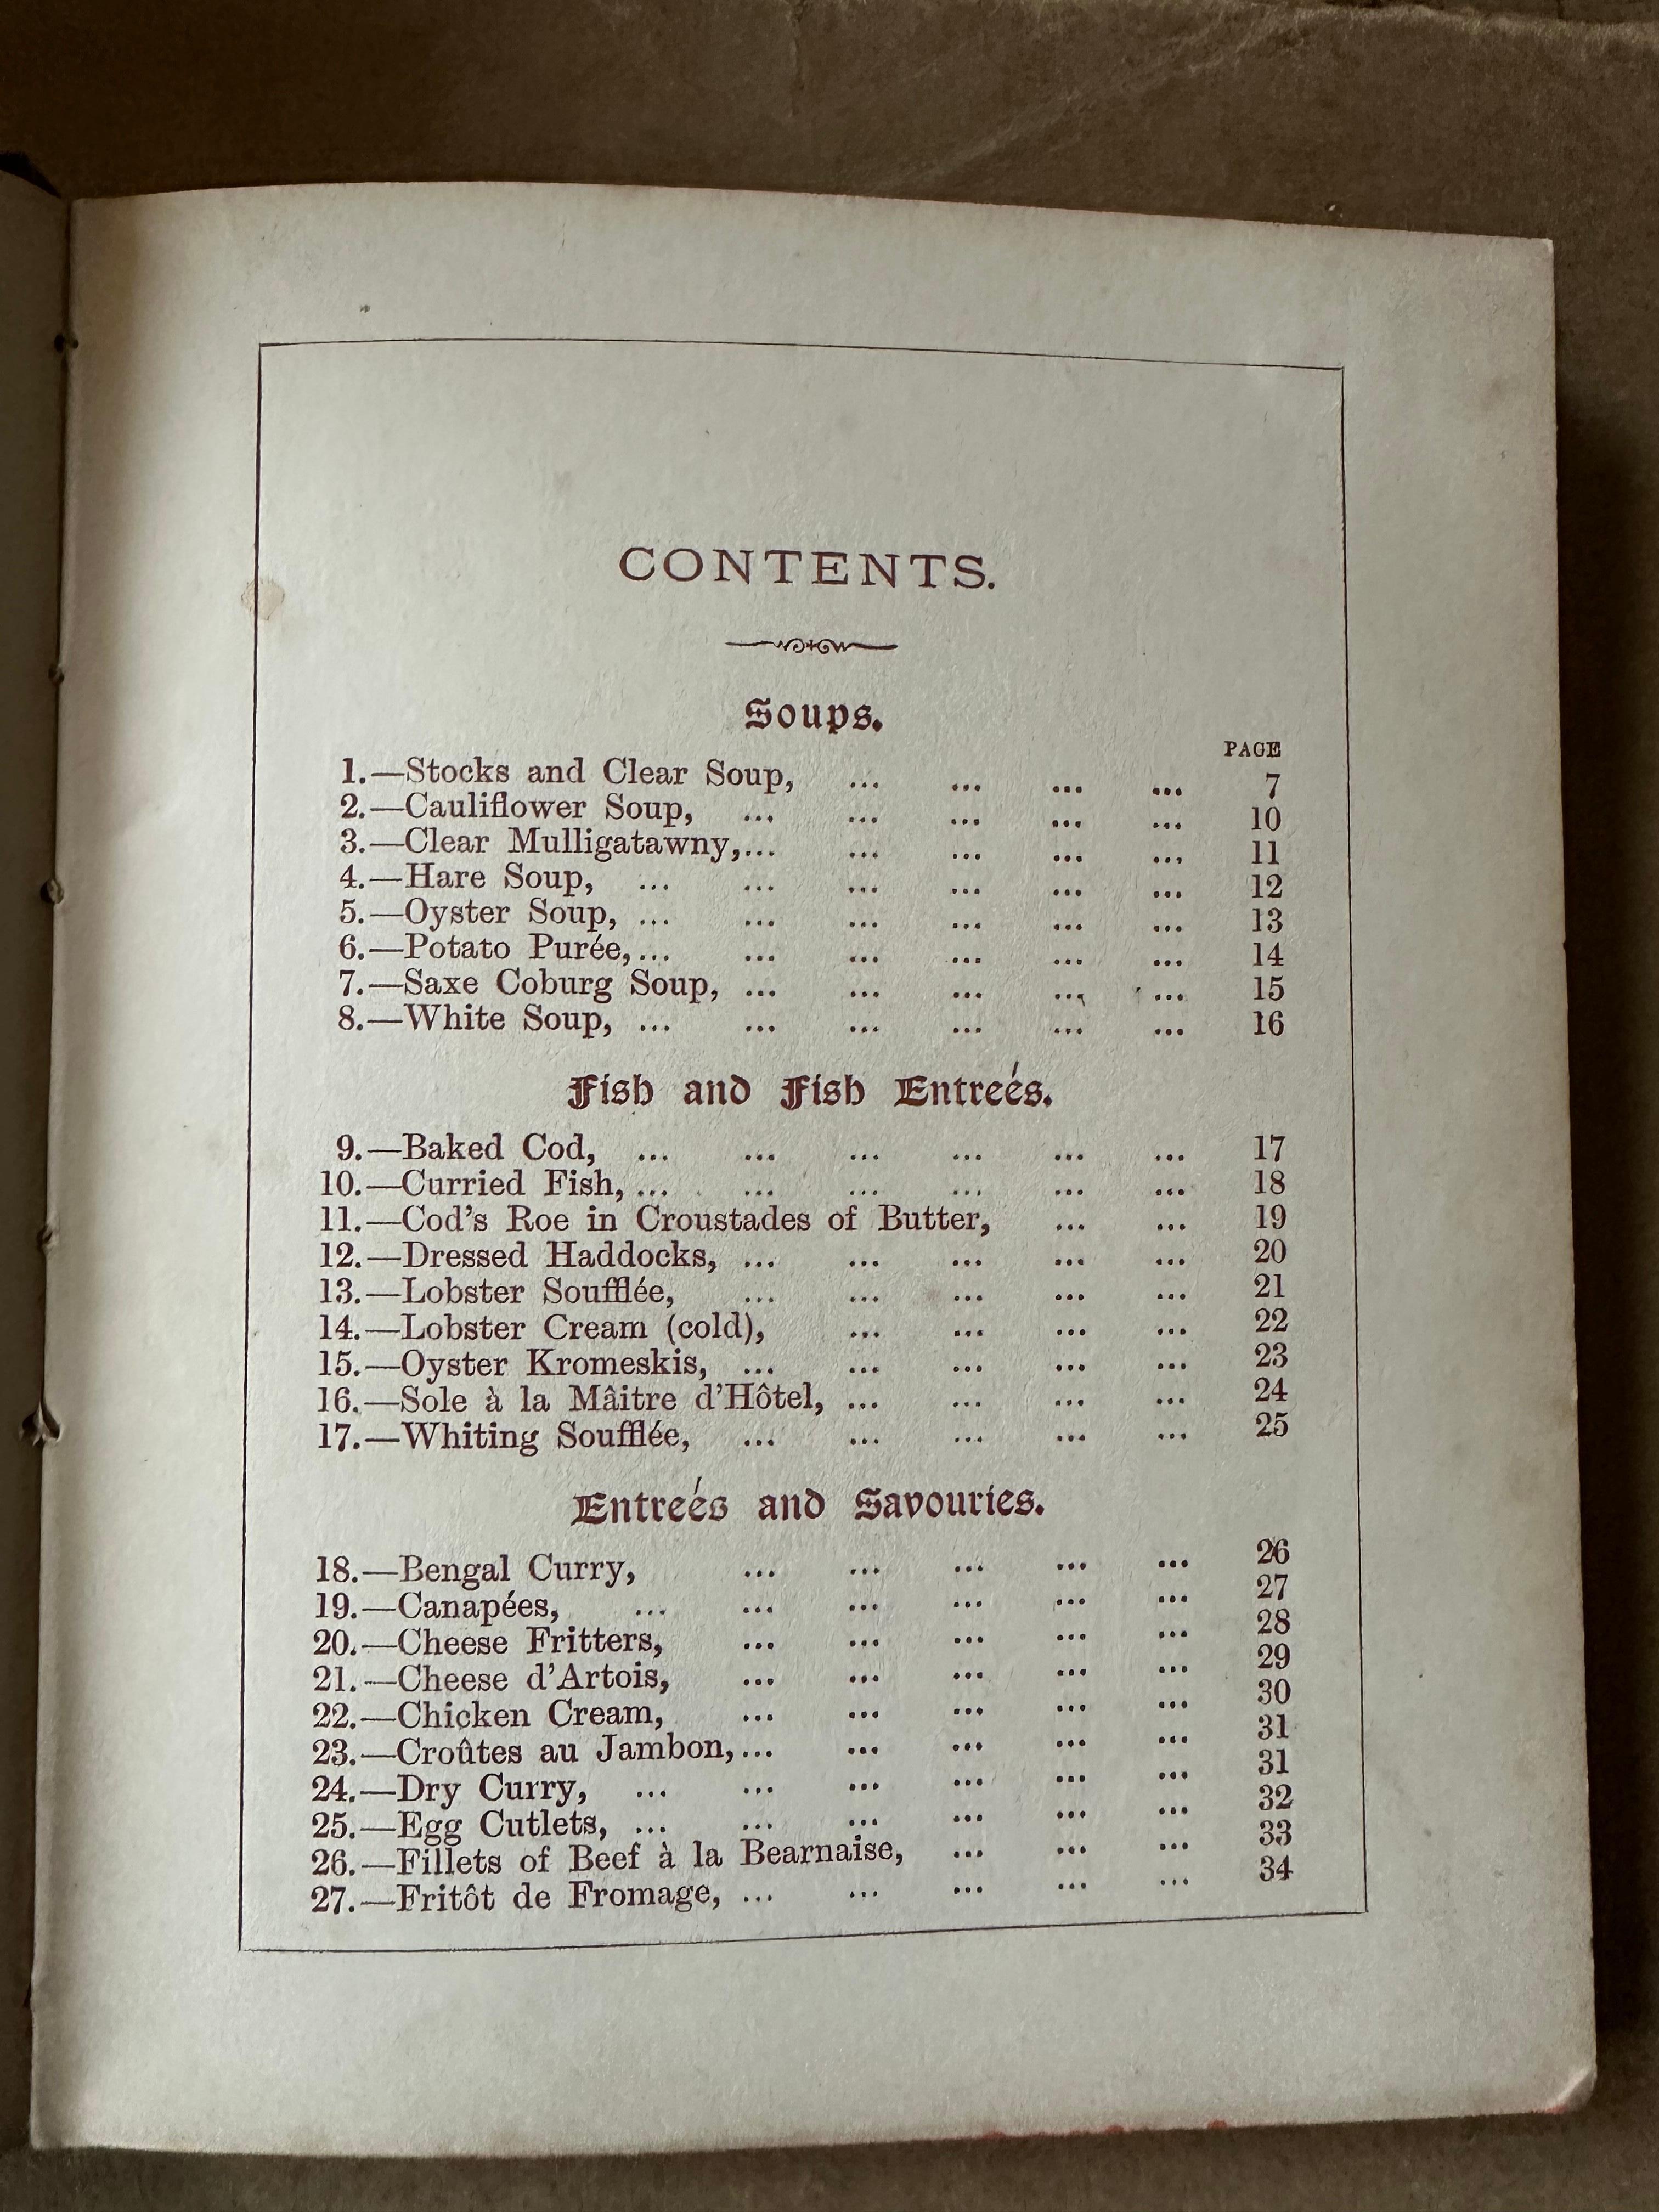 Title: **Superior Cookery Recipes**

Issued by: Glasgow School of Cookery

Printer: N. Adshead, Glasgow

Year of Publication: 1888
Size: Small 4to
Page Count: 64 pages
Printing Features: Printed in maroon throughout
Binding: Publisher's blue cloth